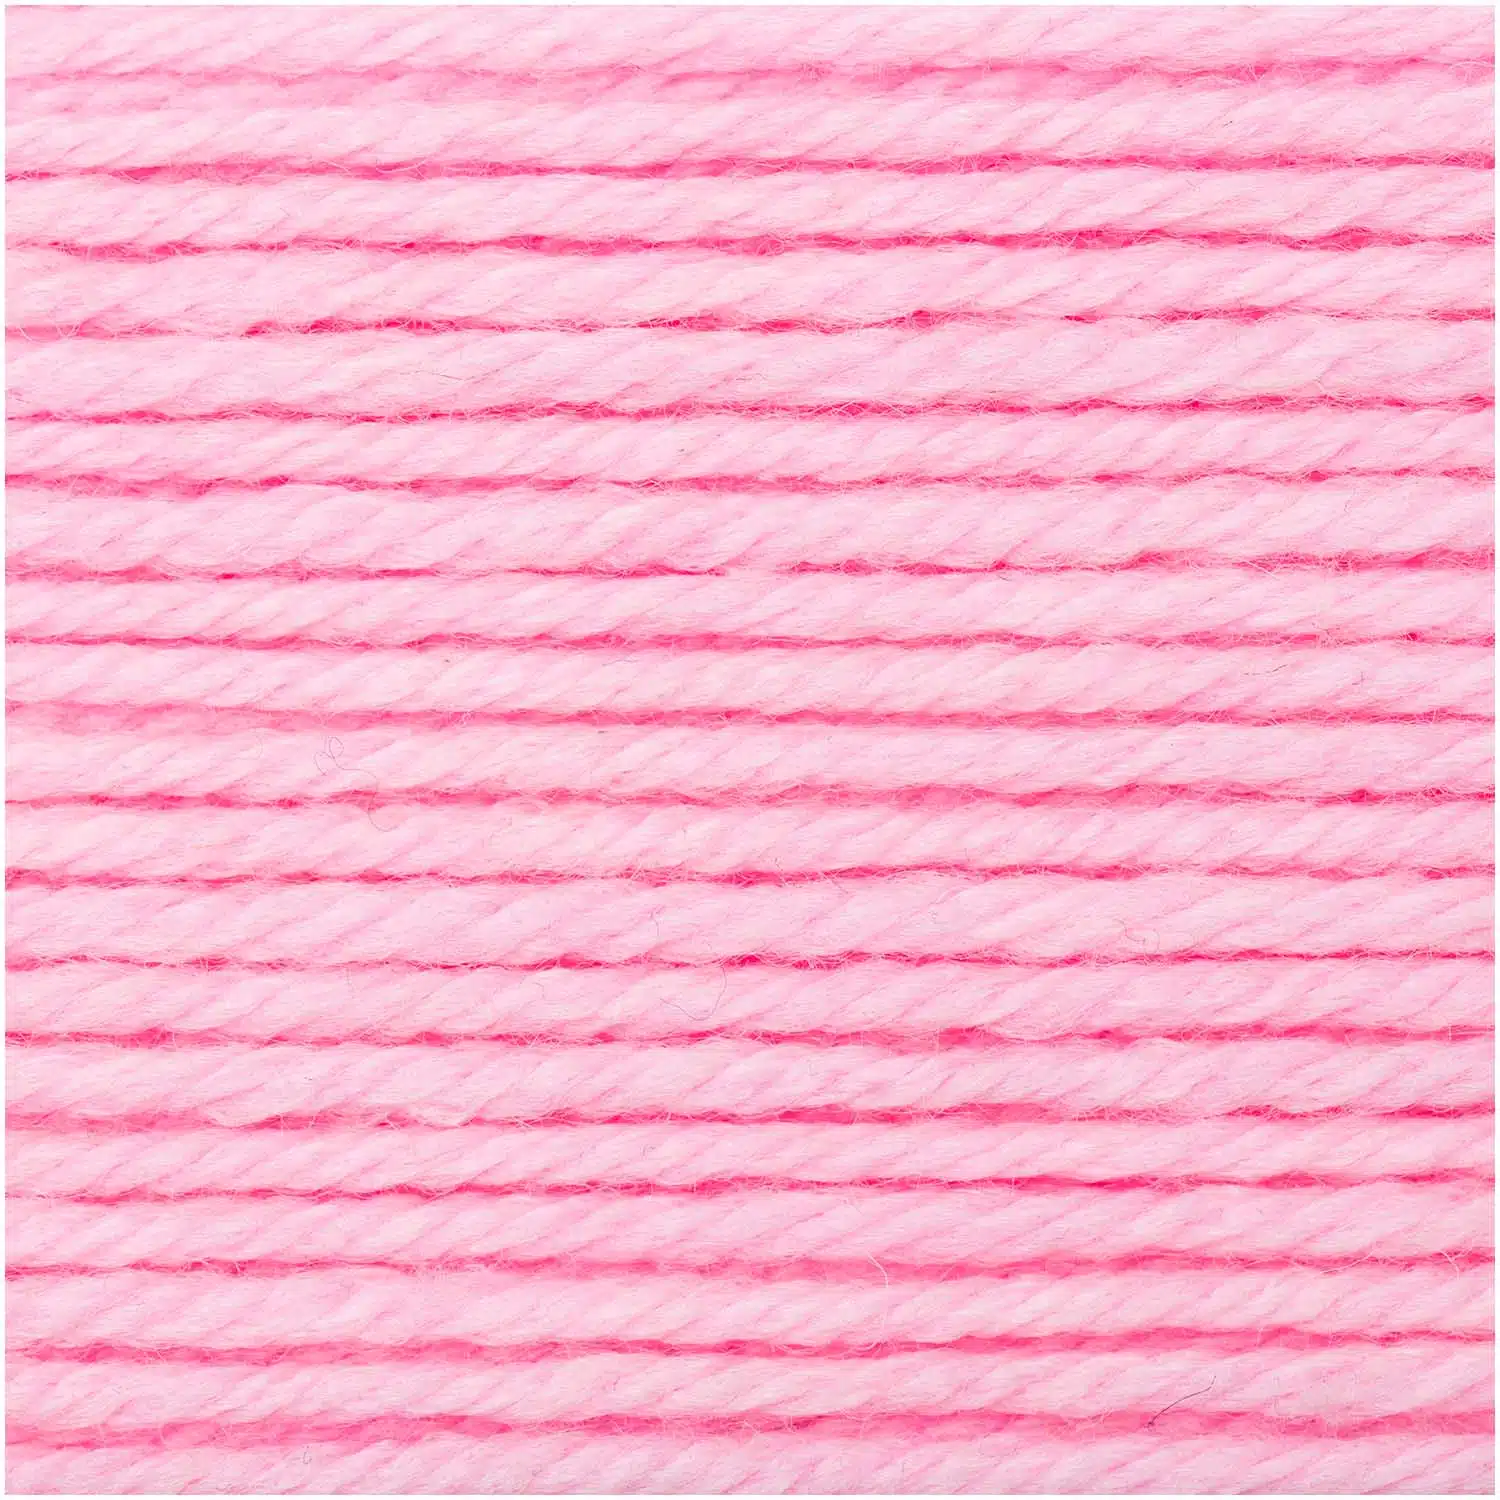 Rico Essentials Mega Wool Chunky - Candy Pink 017